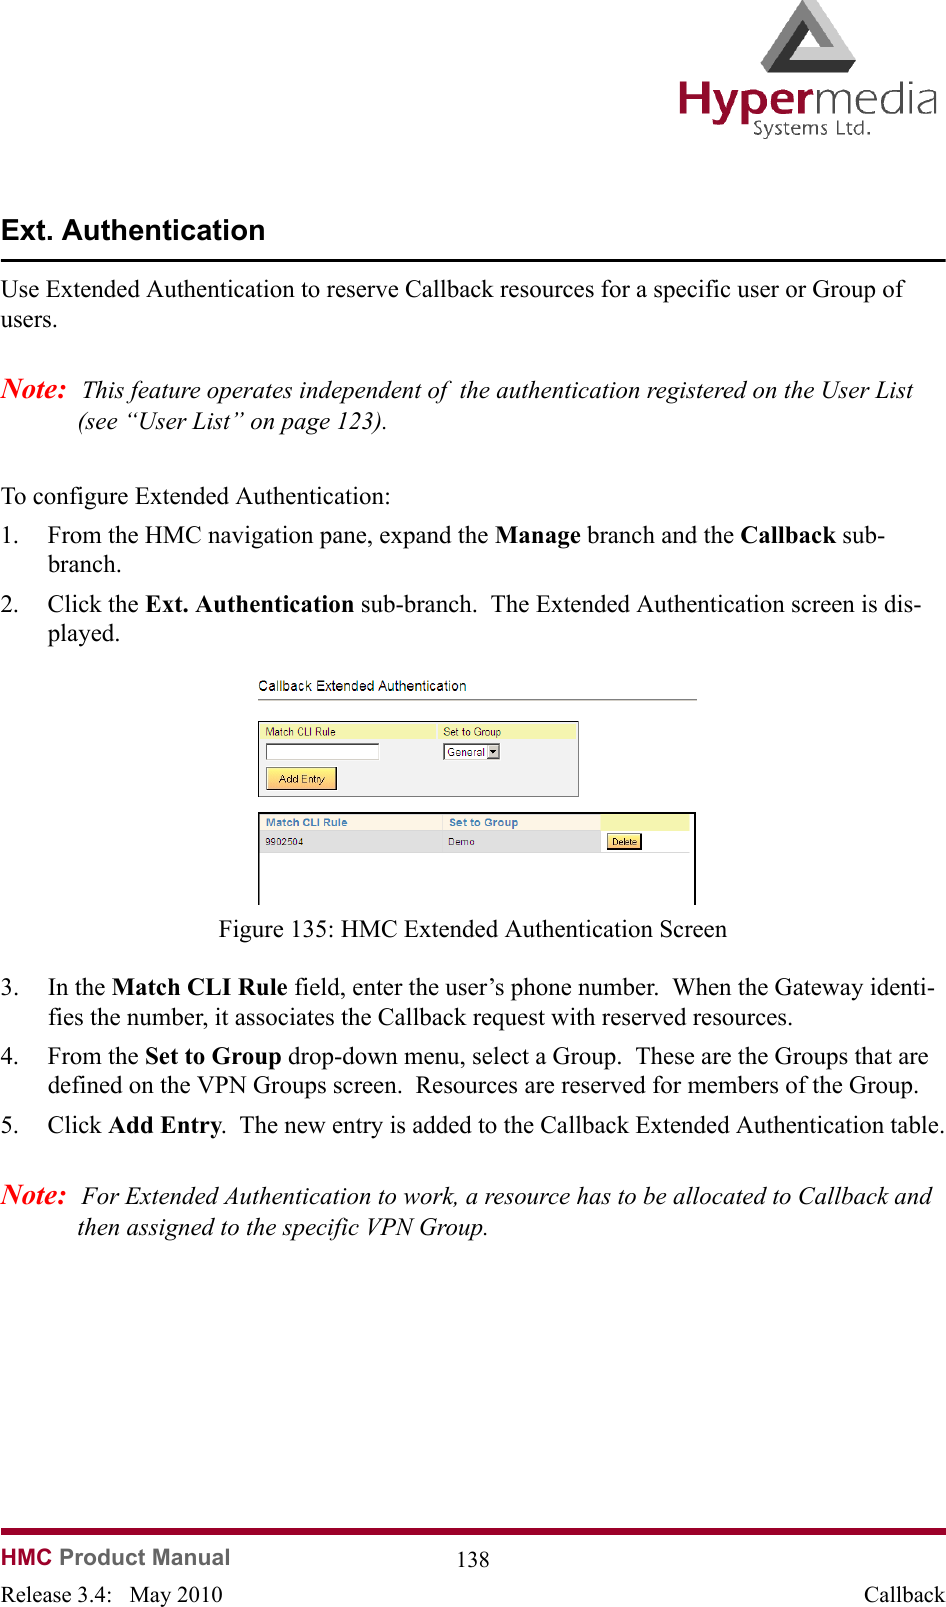   HMC Product Manual  138Release 3.4:   May 2010 CallbackExt. AuthenticationUse Extended Authentication to reserve Callback resources for a specific user or Group of users.Note:  This feature operates independent of  the authentication registered on the User List (see “User List” on page 123). To configure Extended Authentication:1. From the HMC navigation pane, expand the Manage branch and the Callback sub-branch.2. Click the Ext. Authentication sub-branch.  The Extended Authentication screen is dis-played.              Figure 135: HMC Extended Authentication Screen3. In the Match CLI Rule field, enter the user’s phone number.  When the Gateway identi-fies the number, it associates the Callback request with reserved resources.4. From the Set to Group drop-down menu, select a Group.  These are the Groups that are defined on the VPN Groups screen.  Resources are reserved for members of the Group.5. Click Add Entry.  The new entry is added to the Callback Extended Authentication table.Note:  For Extended Authentication to work, a resource has to be allocated to Callback and then assigned to the specific VPN Group.